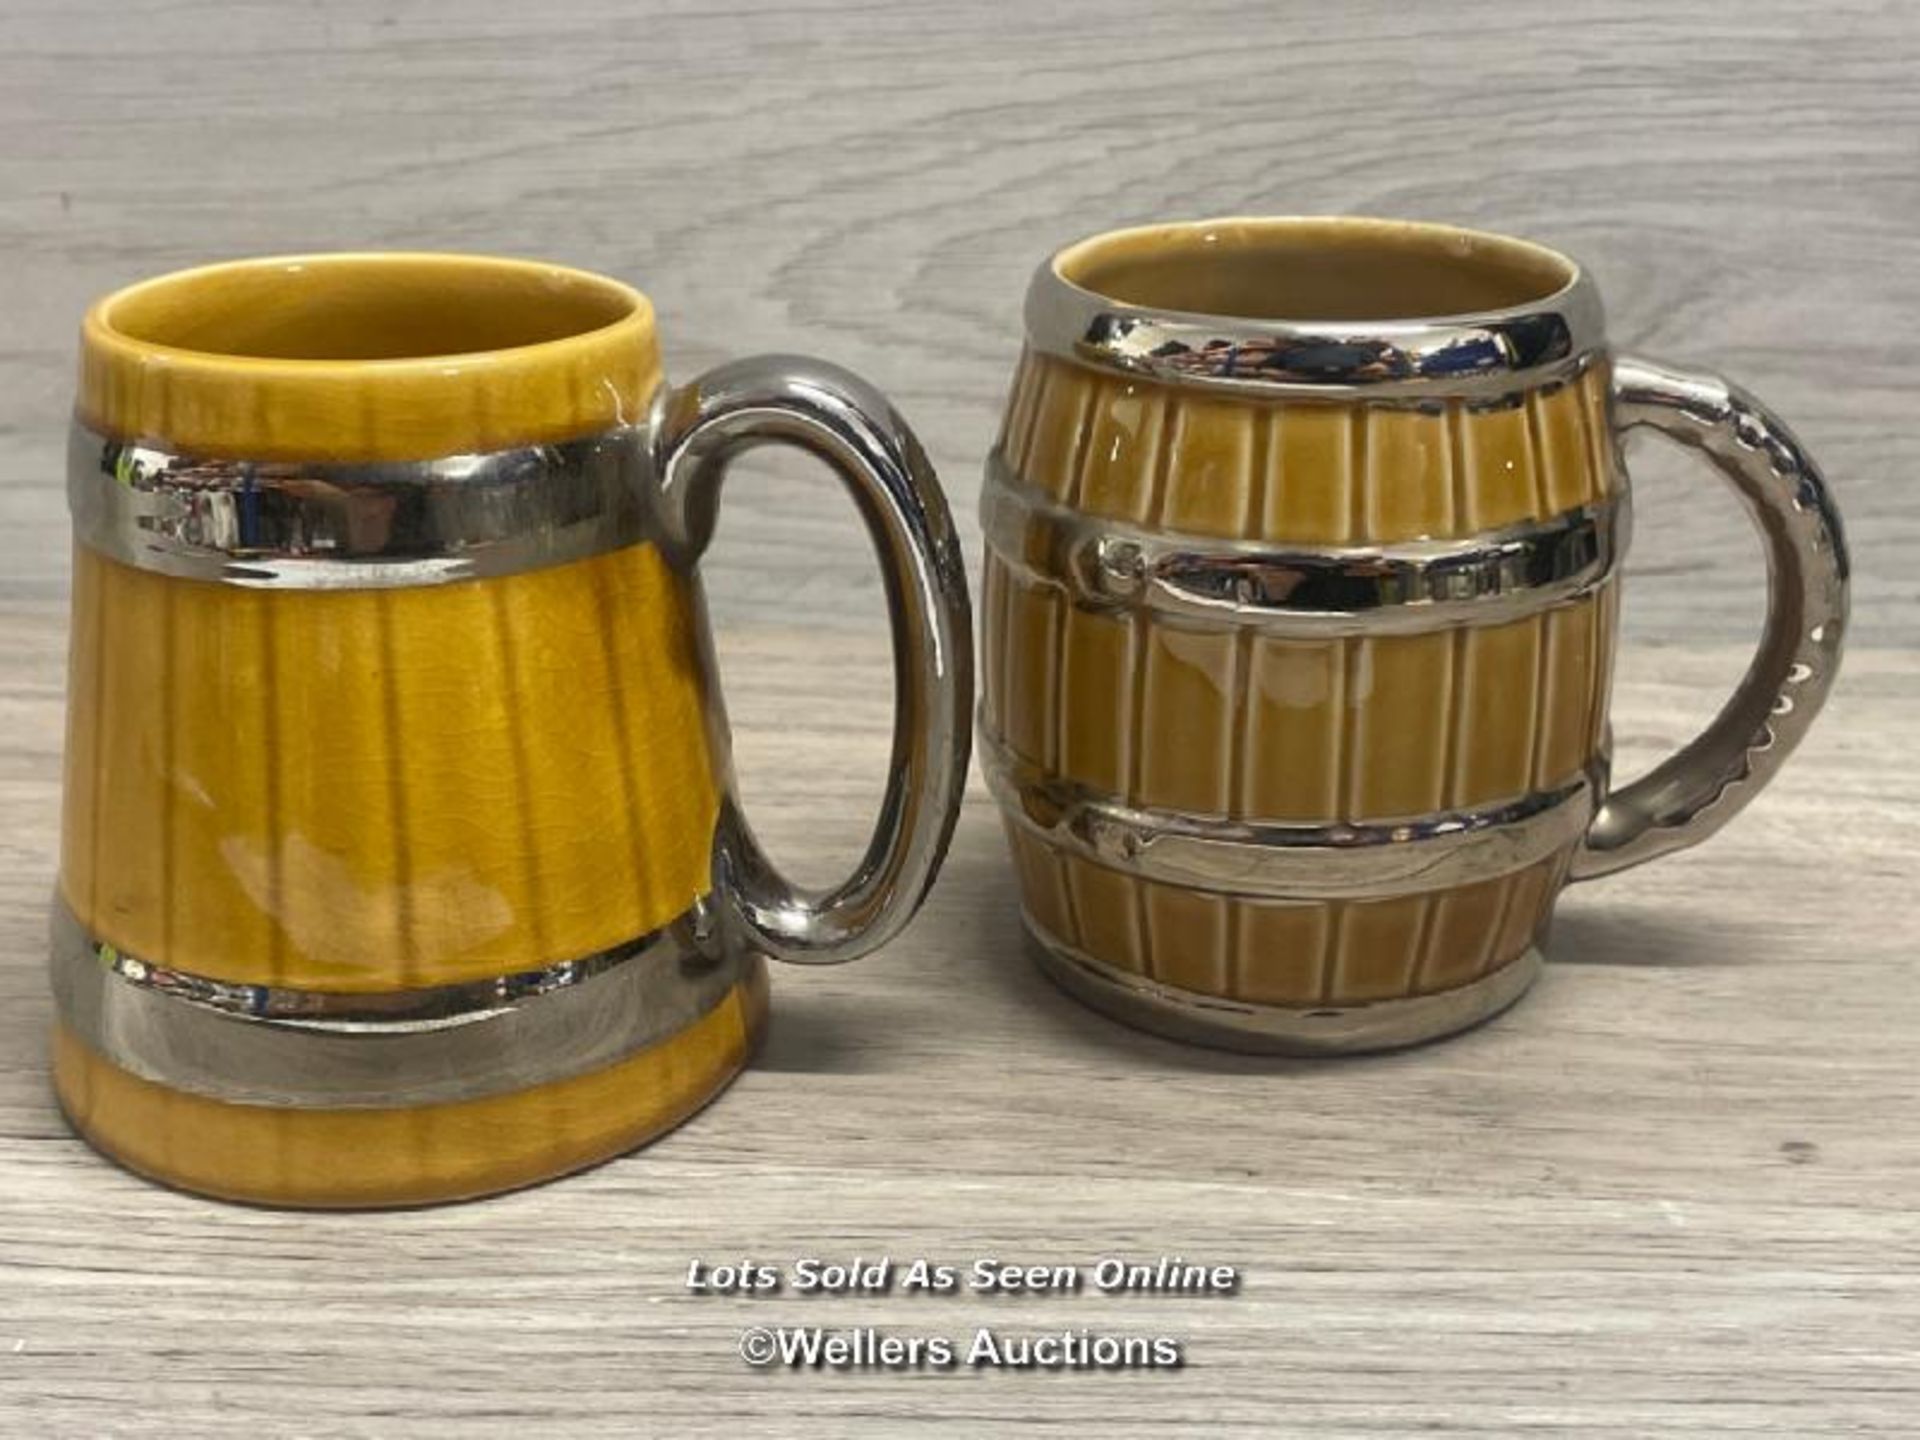 TWO WADE BARREL TANKARDS WITH SILVERED DECORATION, BOTH IN GOOD CONDITION, C1960